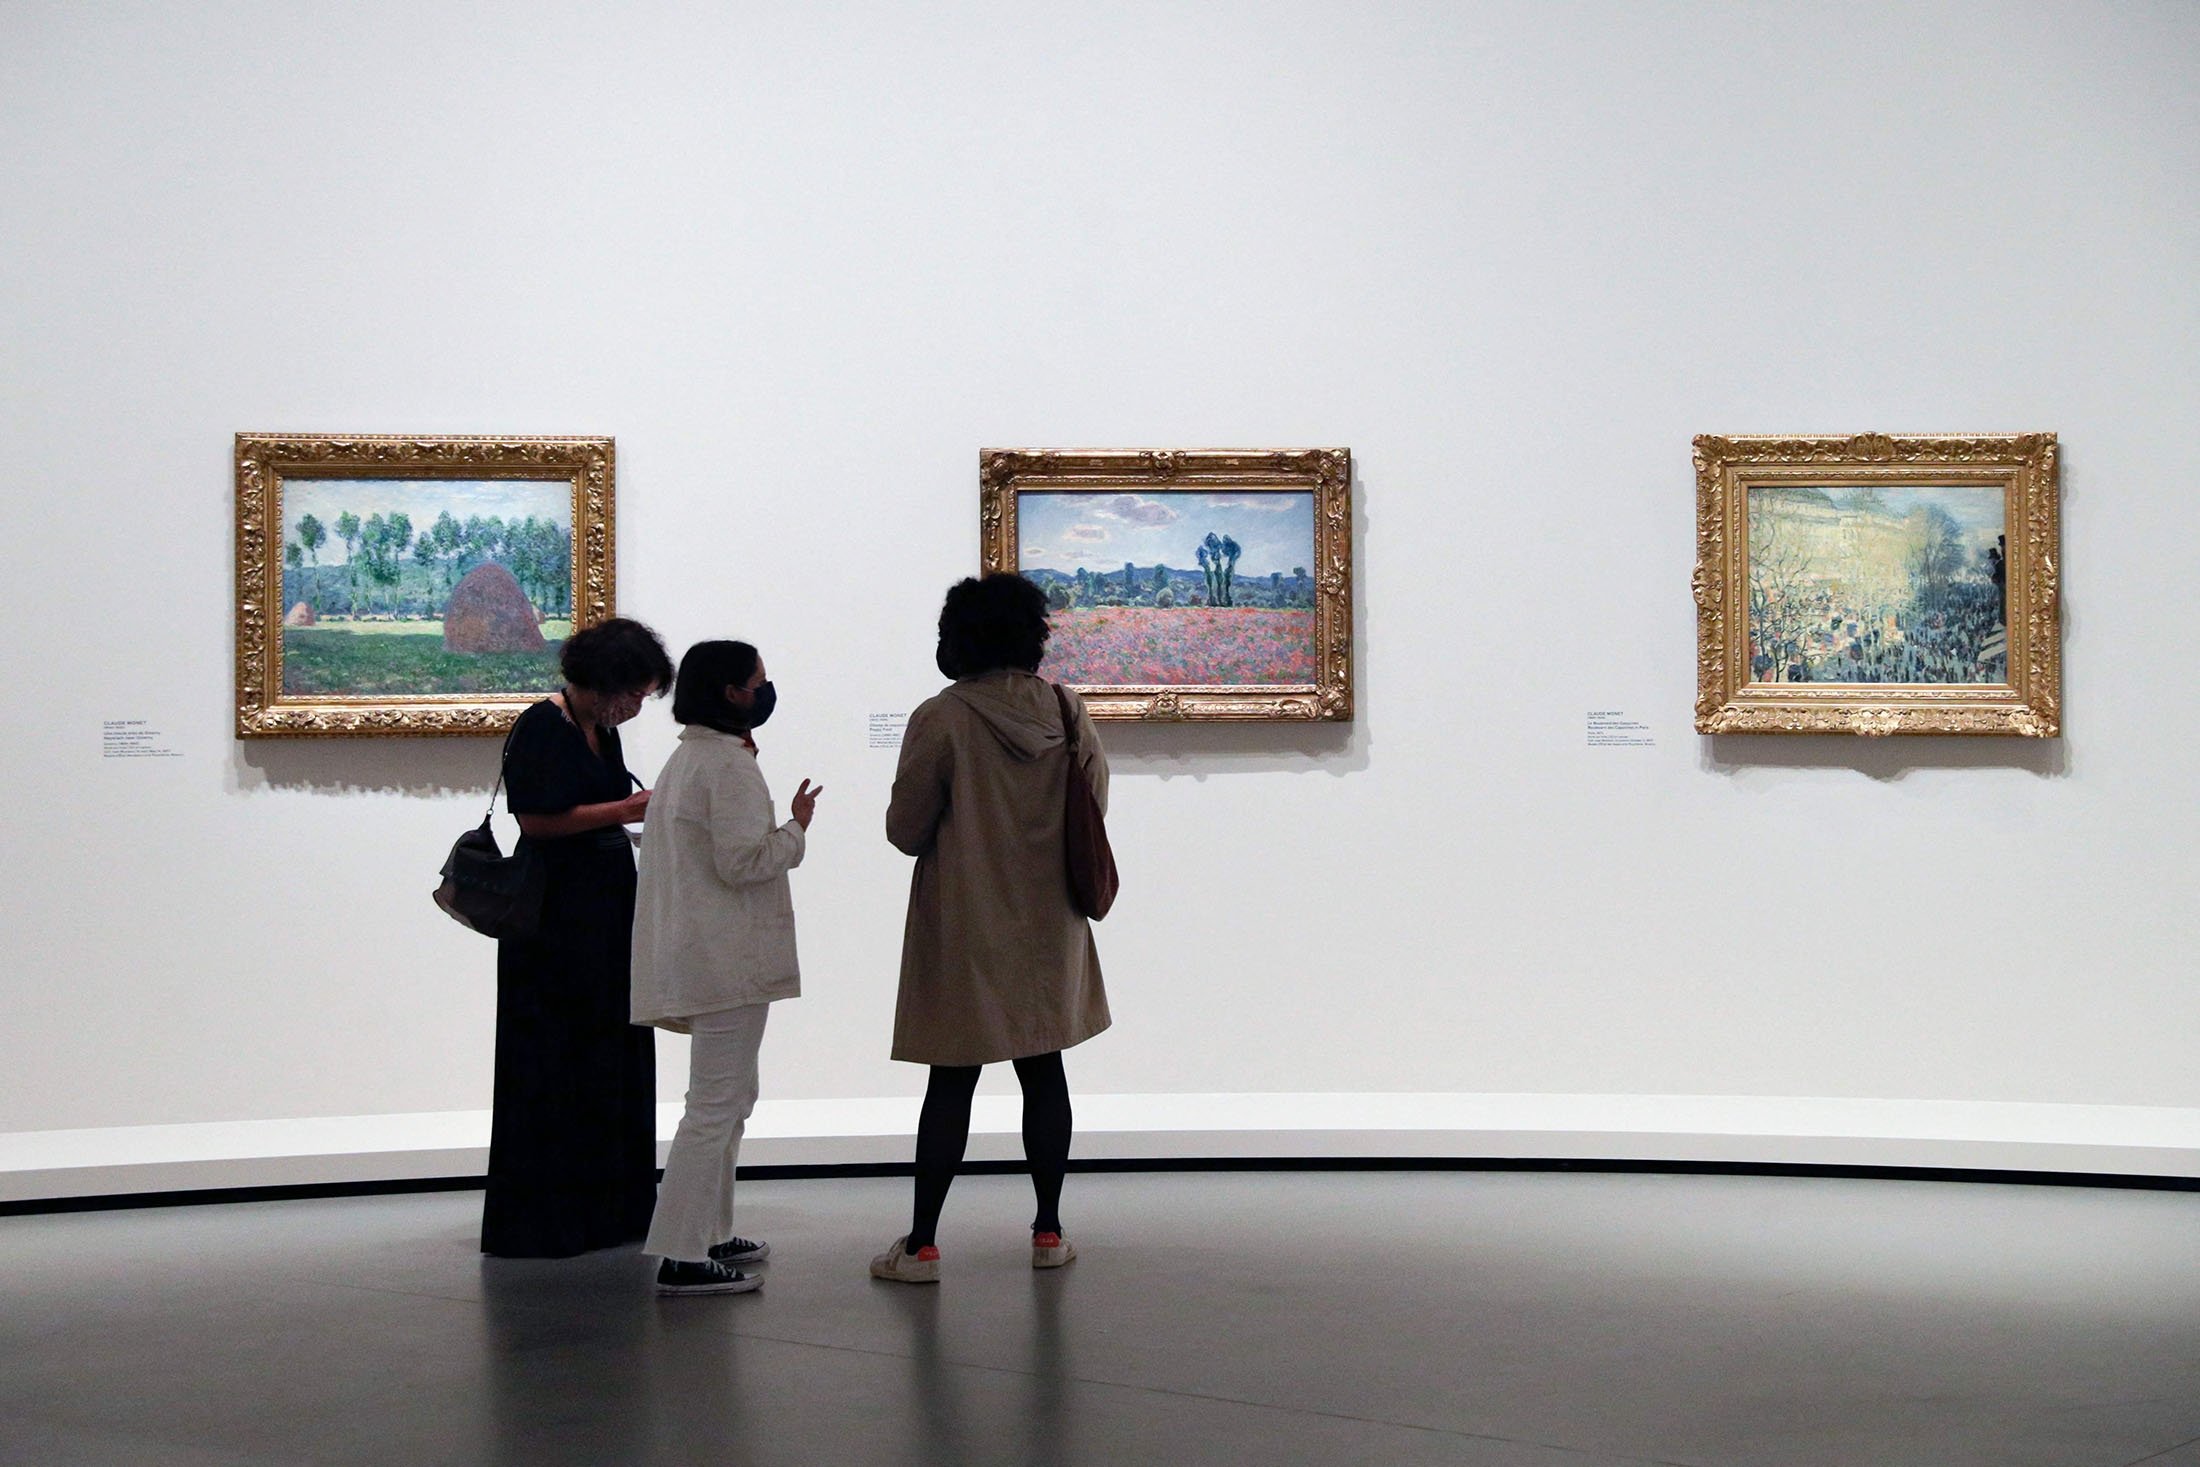 Visitors look at paintings by French painter Pierre Bonnard during a press visit of the exhibition "Morozov Collection: Icons Of Modern Art" at the Fondation Louis Vuitton in Paris, France, Sept. 15, 2021. (AFP Photo)